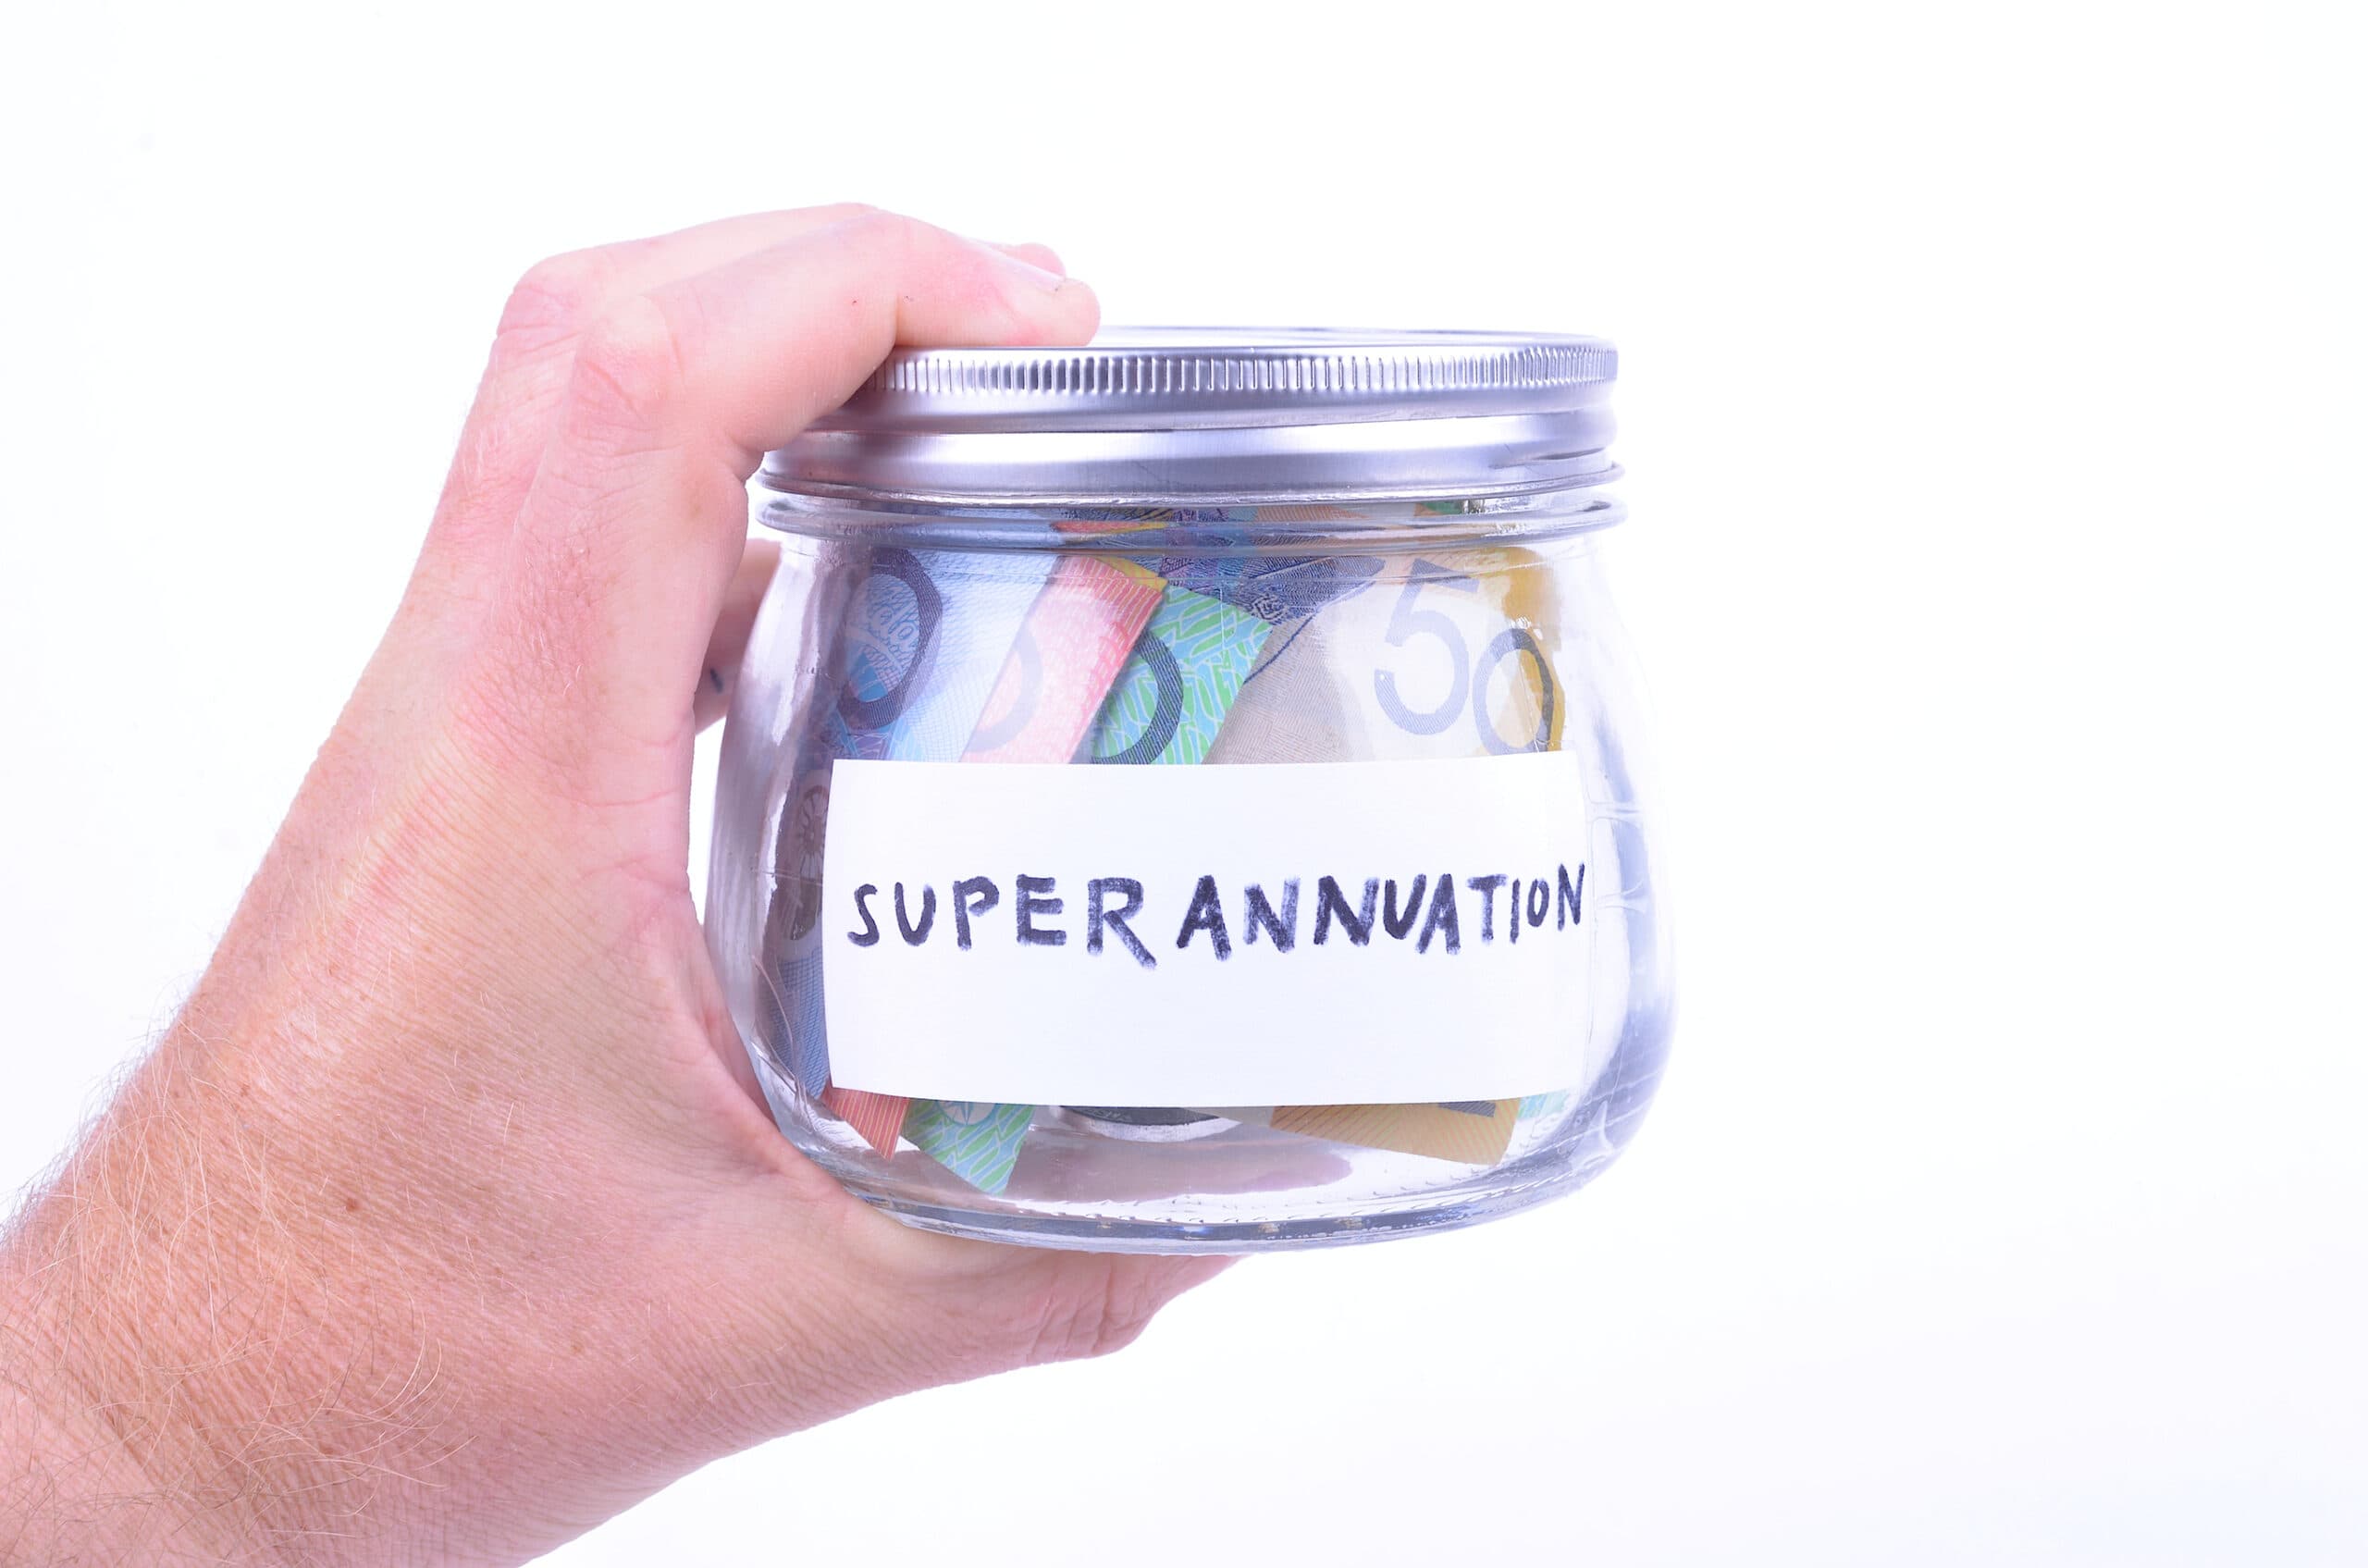 Man holding a jar of money filled with his superannuation savings